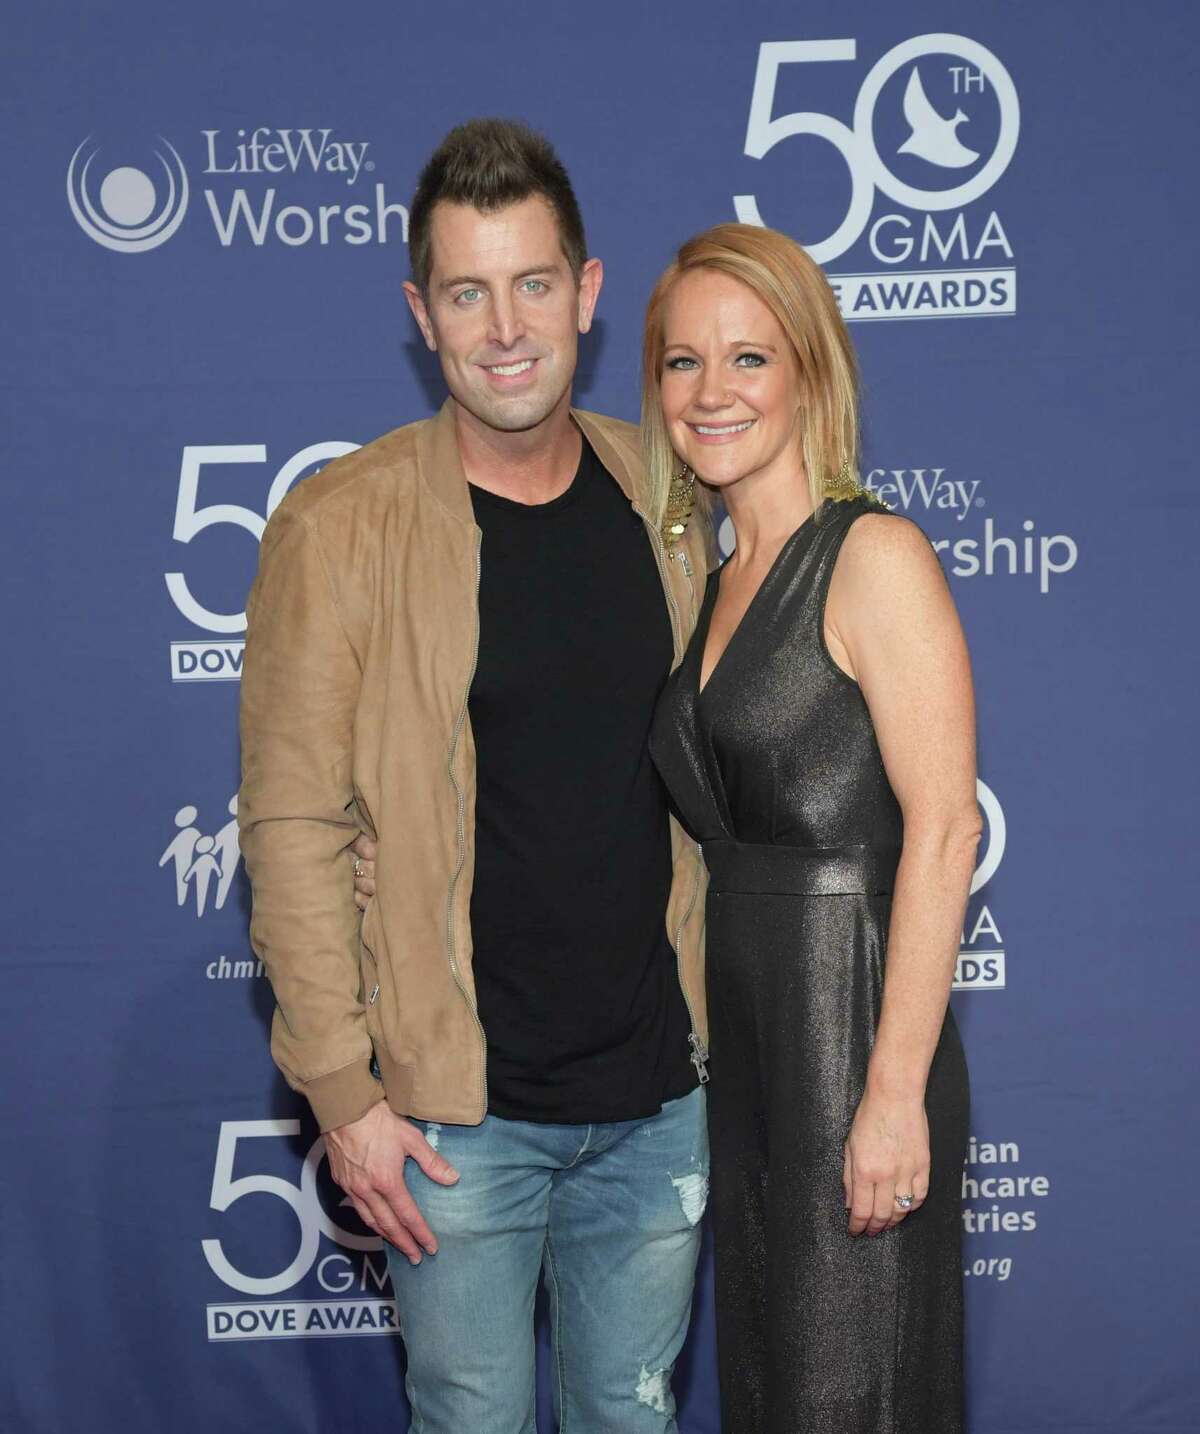 Jeremy Camp and his wife Adrienne attend the 50th Annual GMA Dove Awards in 2019. The two married in 2003.